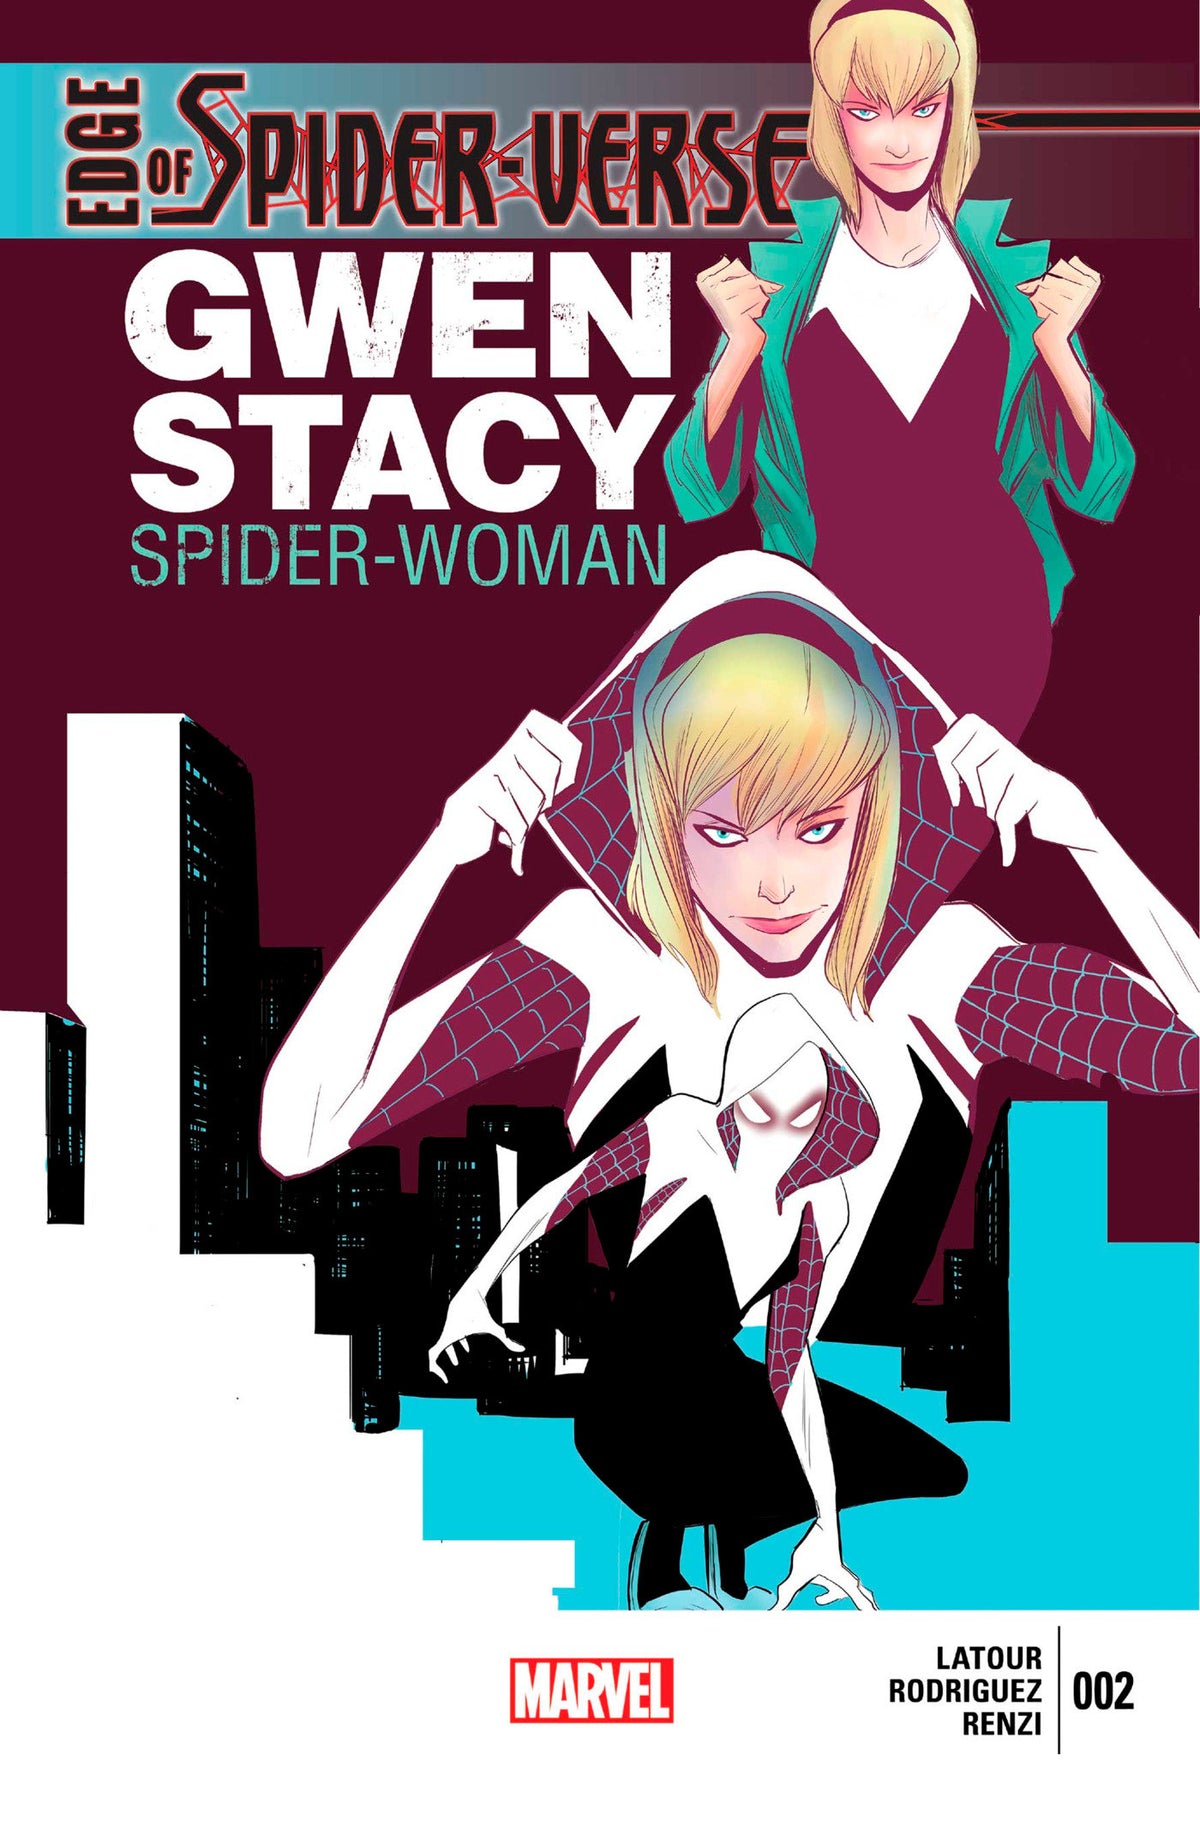 Image of Edge Of Spider-Verse 2 Facsimile Edition comic sold by Stronghold Collectibles.